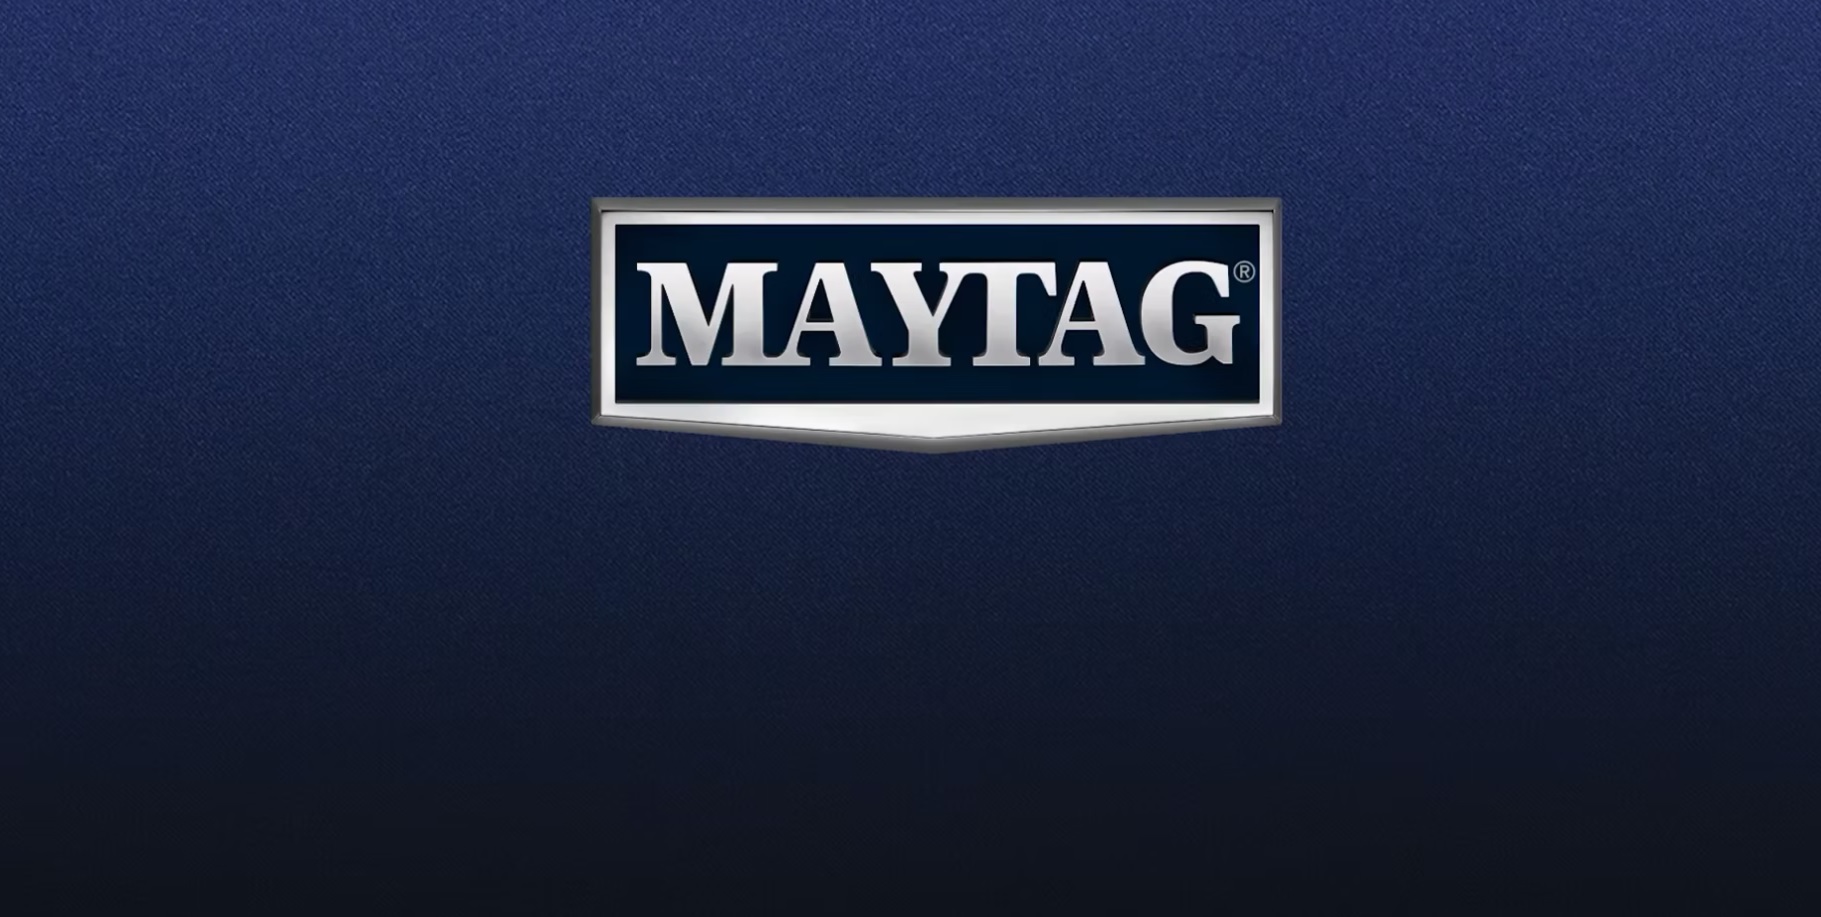 This commercial-grade Maytag® washer brings rugged durability and high-grade performance to the home laundry room. Delivered straight from the commercial Maytag assembly line, this washer features a robust build, including a 1/2 horsepower motor and dual-action agitator, surrounded by thick, galvanized steel paneling engineered to take a beating and resist corrosion. Tough and dependable year after year, we confidently back this washer with our best residential warranty for an in-home, commercial-grade laundry appliance.
***When used only in a single-family home for non-commercial purposes.**Visit maytag.com for Limited Warranty details.